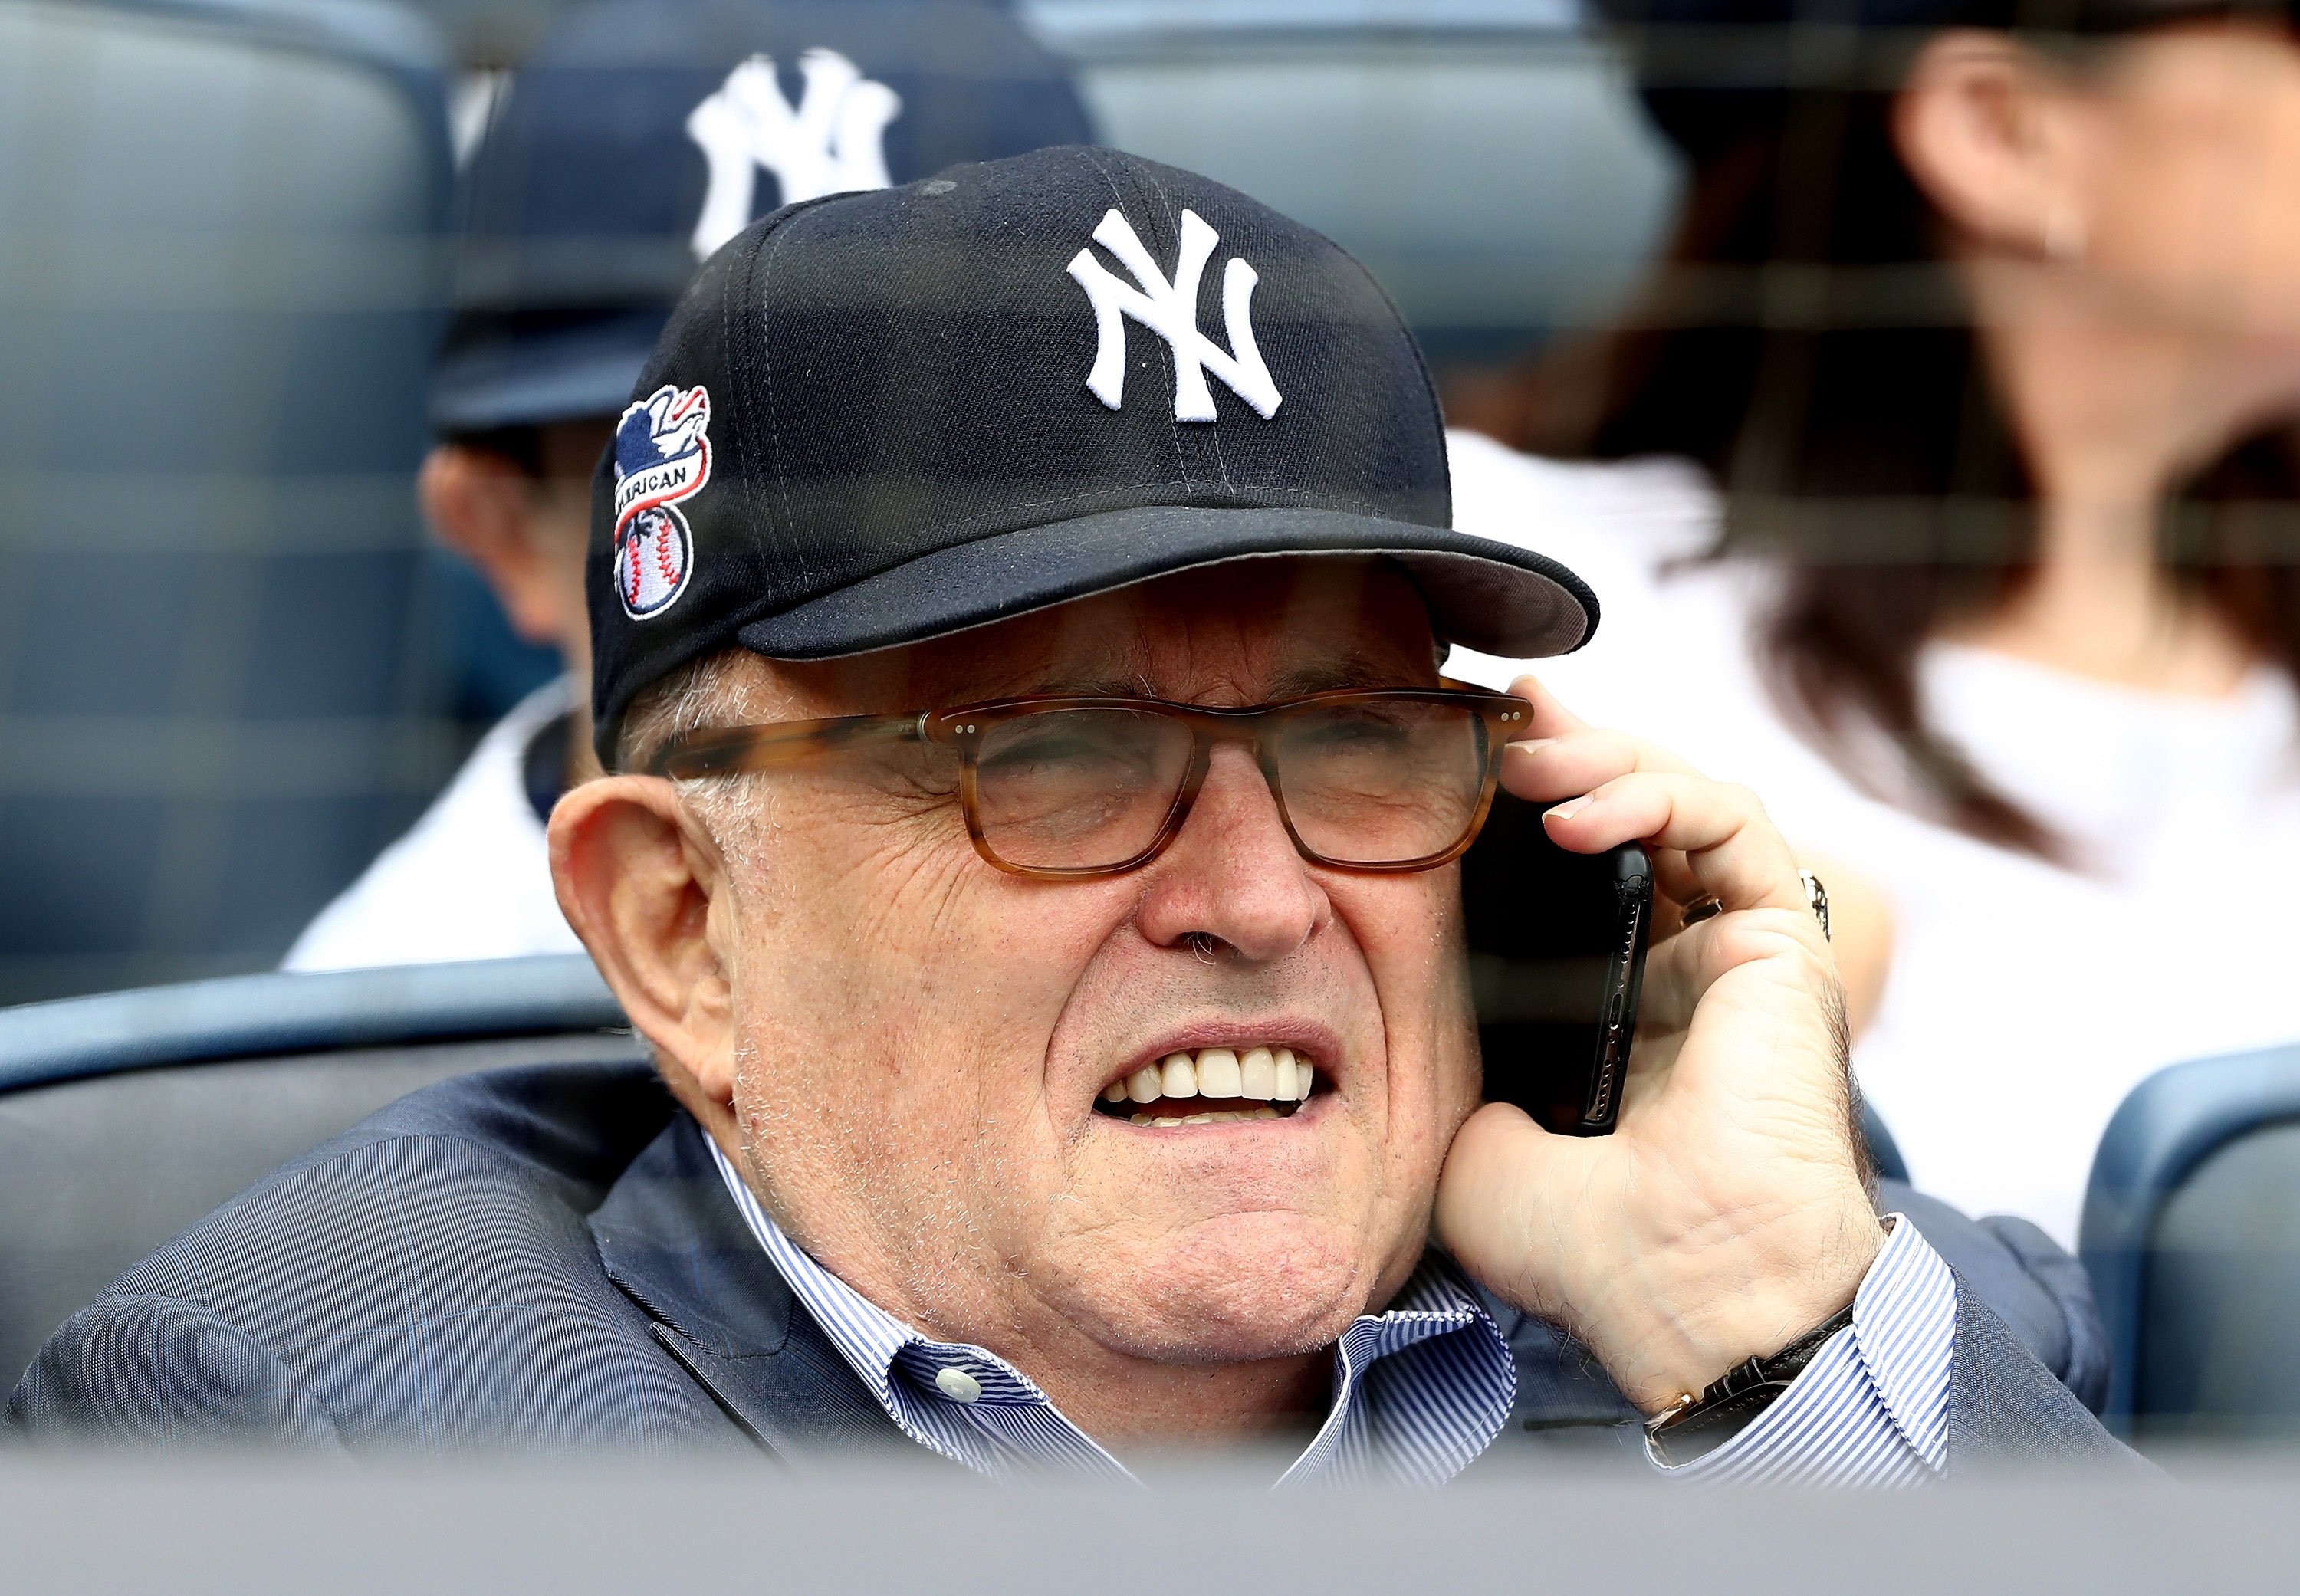 Rudy Giuliani, former New York City mayor and current lawyer for President Donald Trump, attends the game between the New York Yankees and the Houston Astros at Yankee Stadium on May 28, 2018 in the Bronx borough of New York City. MLB players across the league are wearing special uniforms to commemorate Memorial Day. (Photo by Elsa/Getty Images)